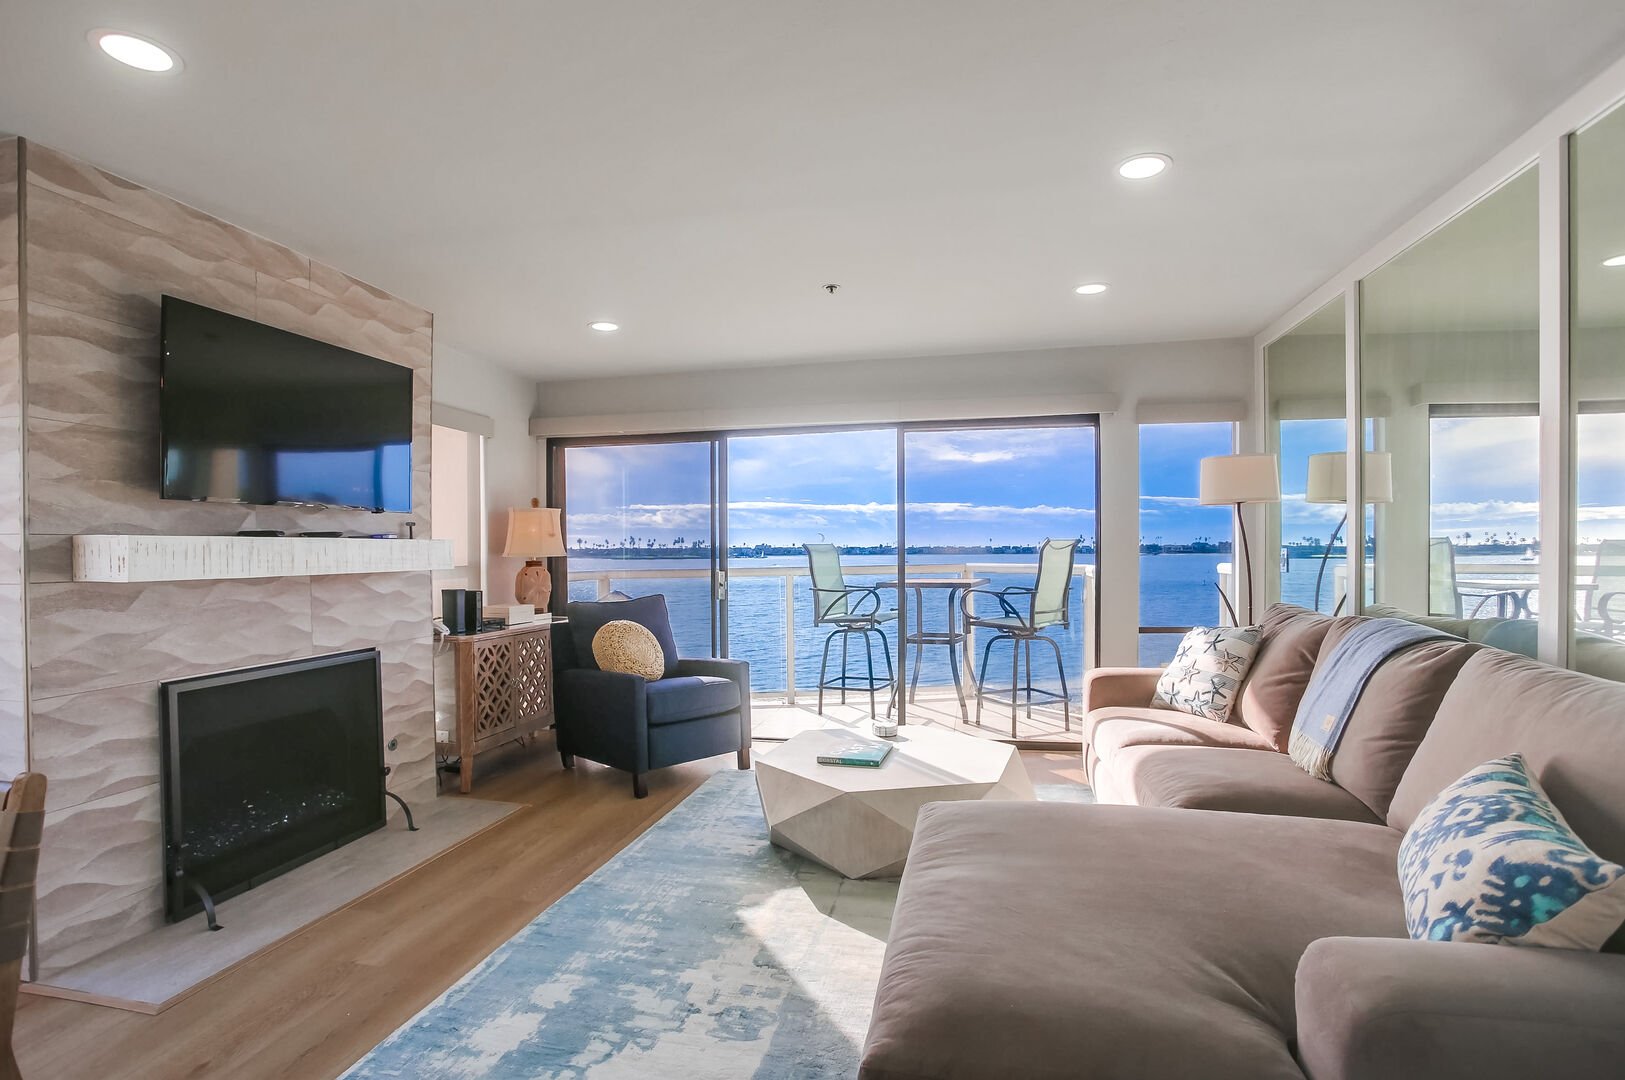 Comfortable new couches and decor welcome you to relax and enjoy the sounds of the waves along Mission Bay or the crackle of the fireplace on a cooler night. Smart TV